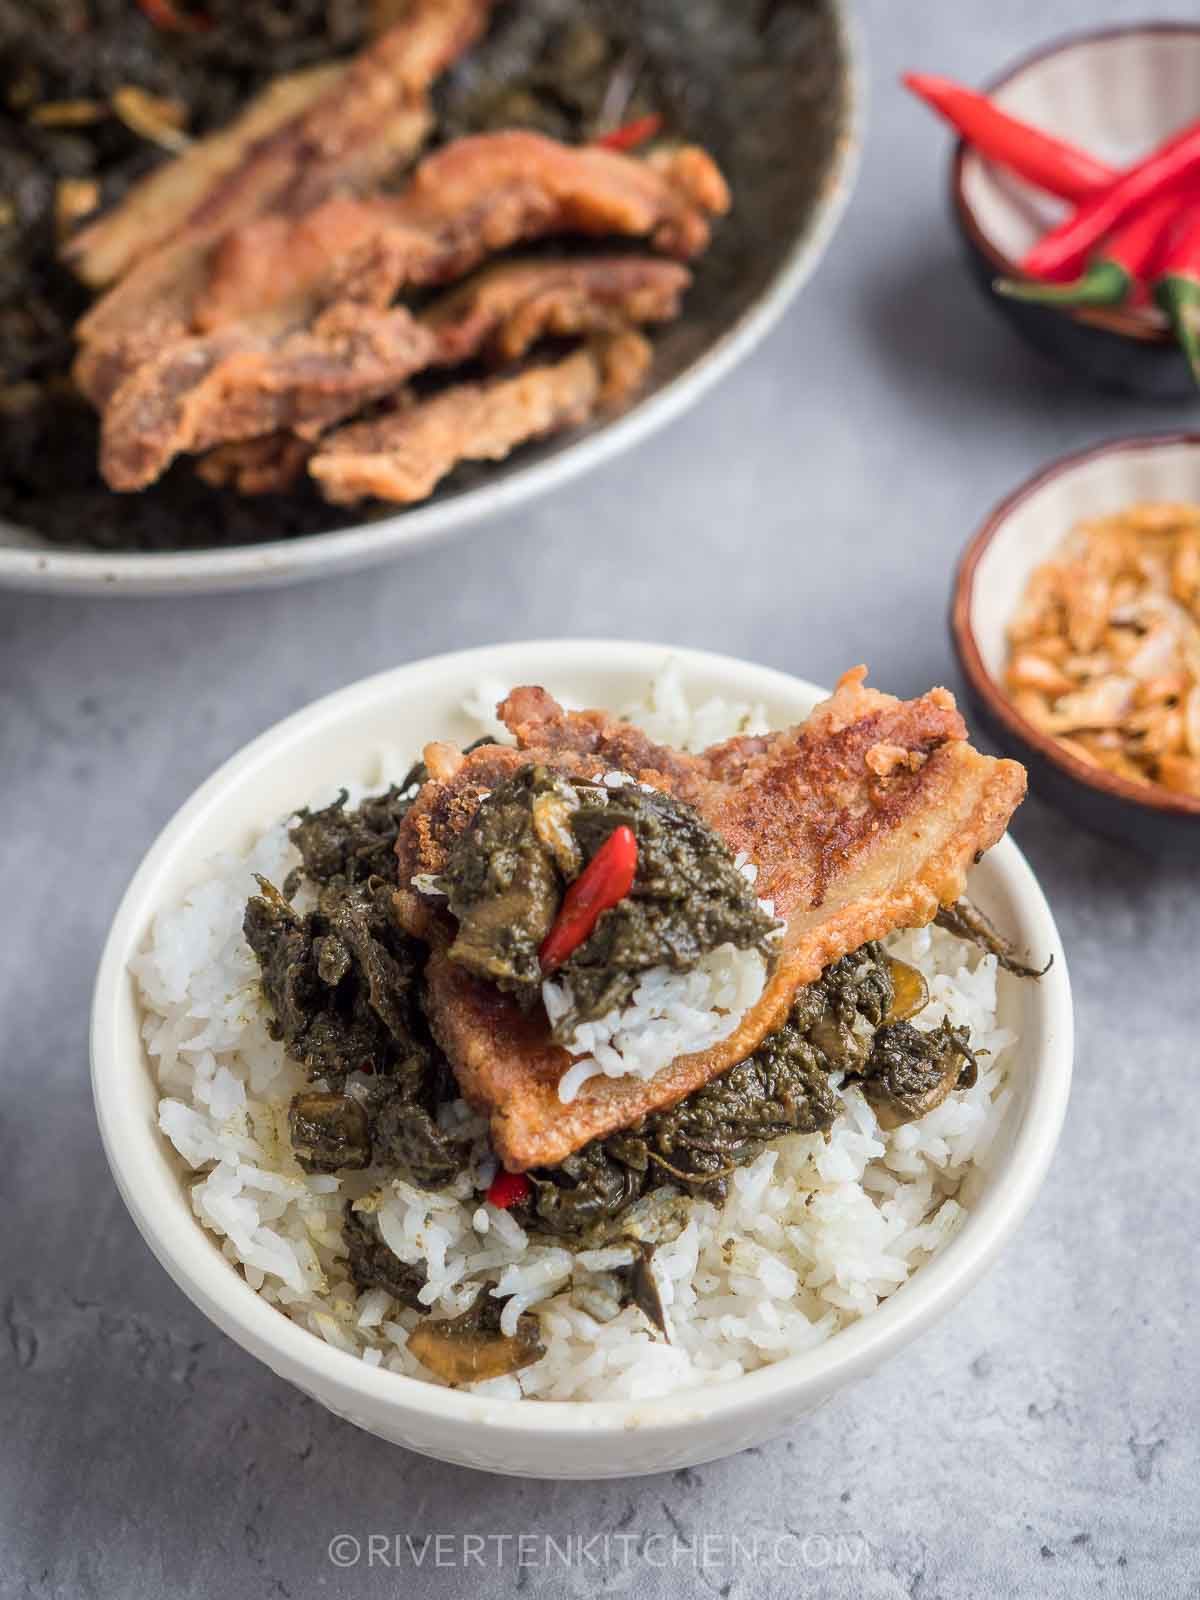 Laing with Crispy Fried Pork and Rice